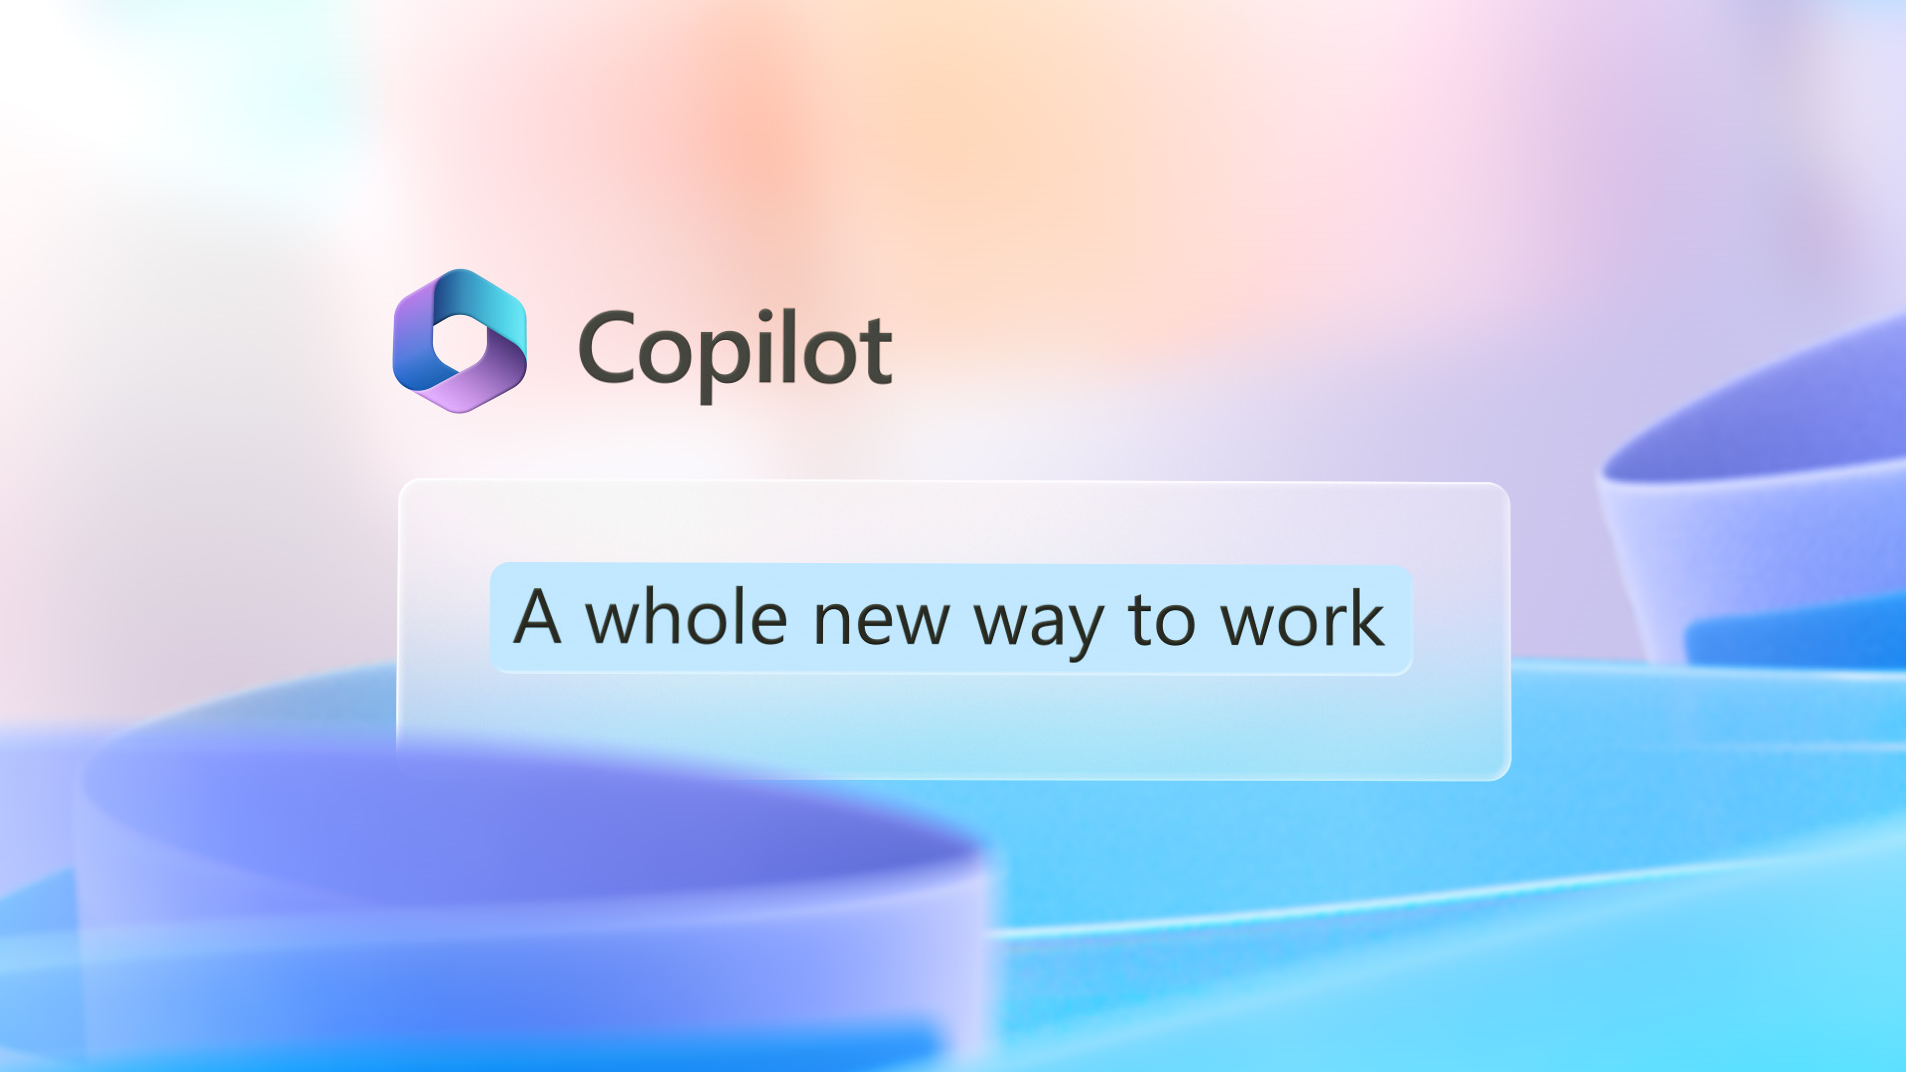 Discover a whole new way to work using Microsoft 365 Copilot for Microsoft Teams